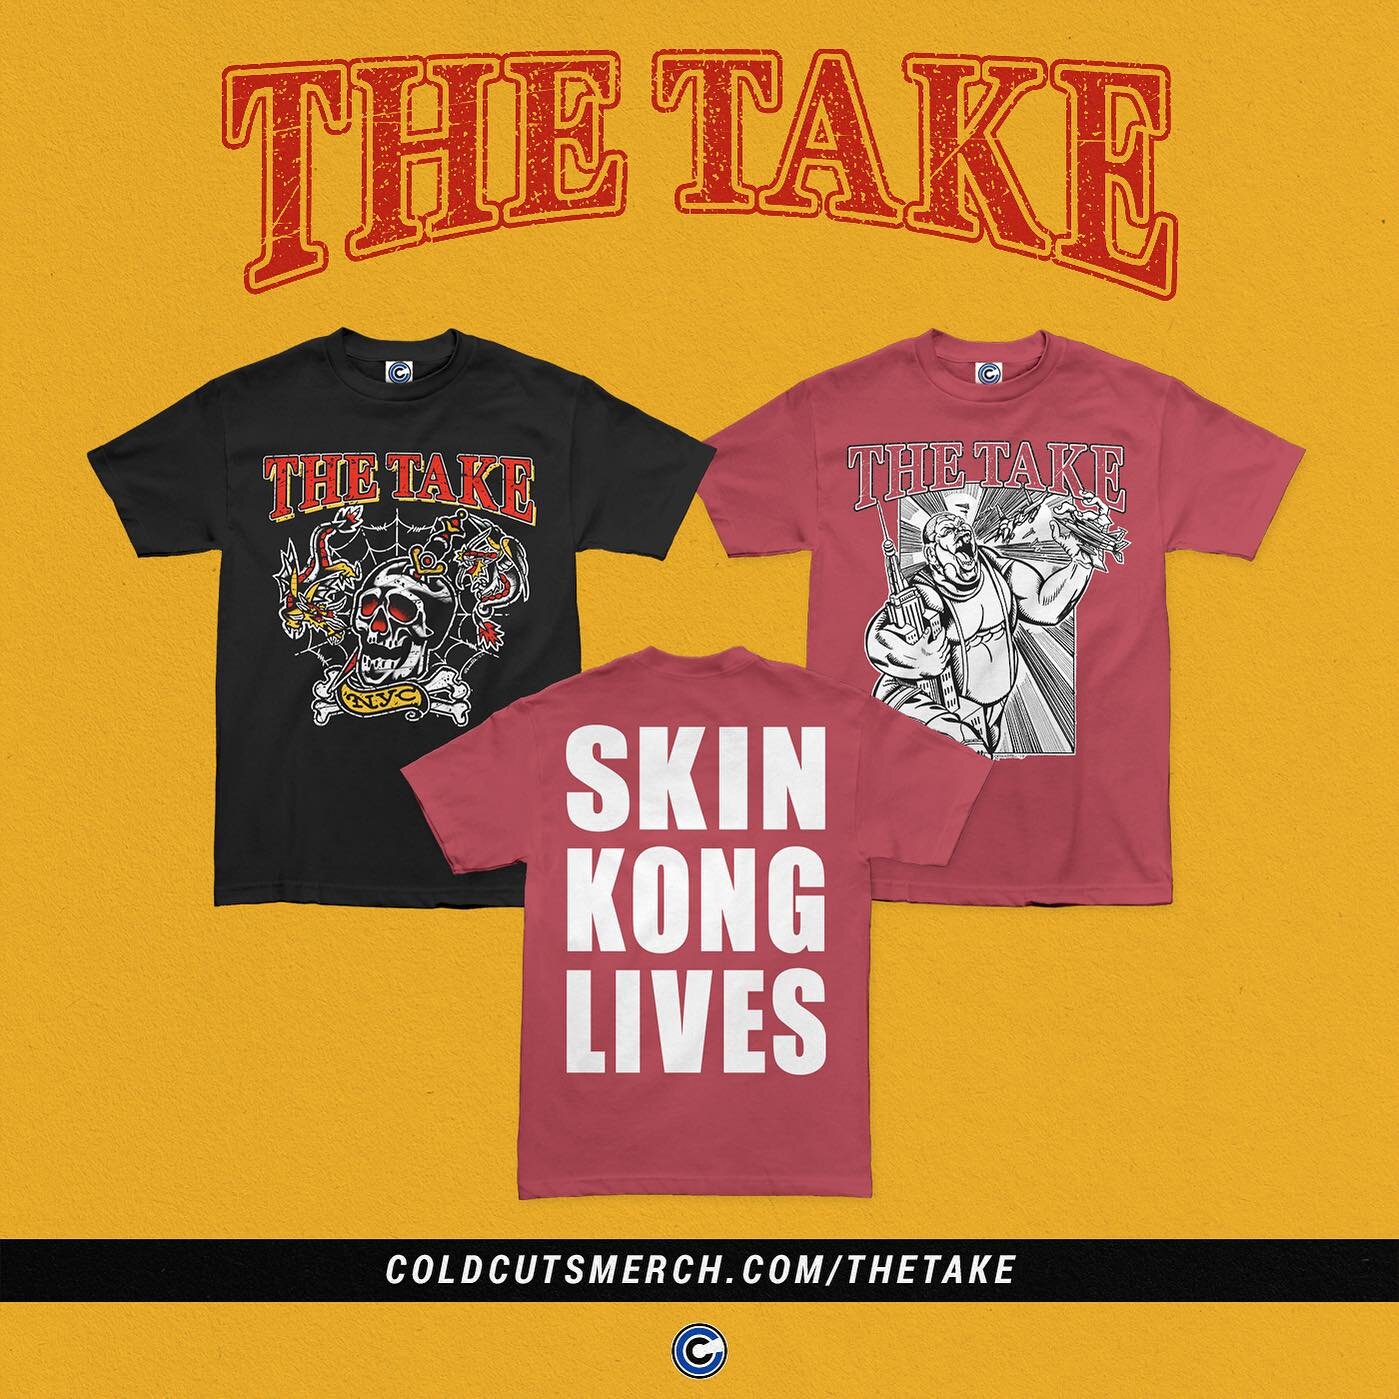 Need a last minute gift idea?  New designs are up at coldcutsmerch.com/thetake .  Get some!!

#thetakenyc #thetake #coldcutsmerch #supportundergroundartist #oi #nyhc #punkrock #nycoi #oicore #skinheads #punksandskins